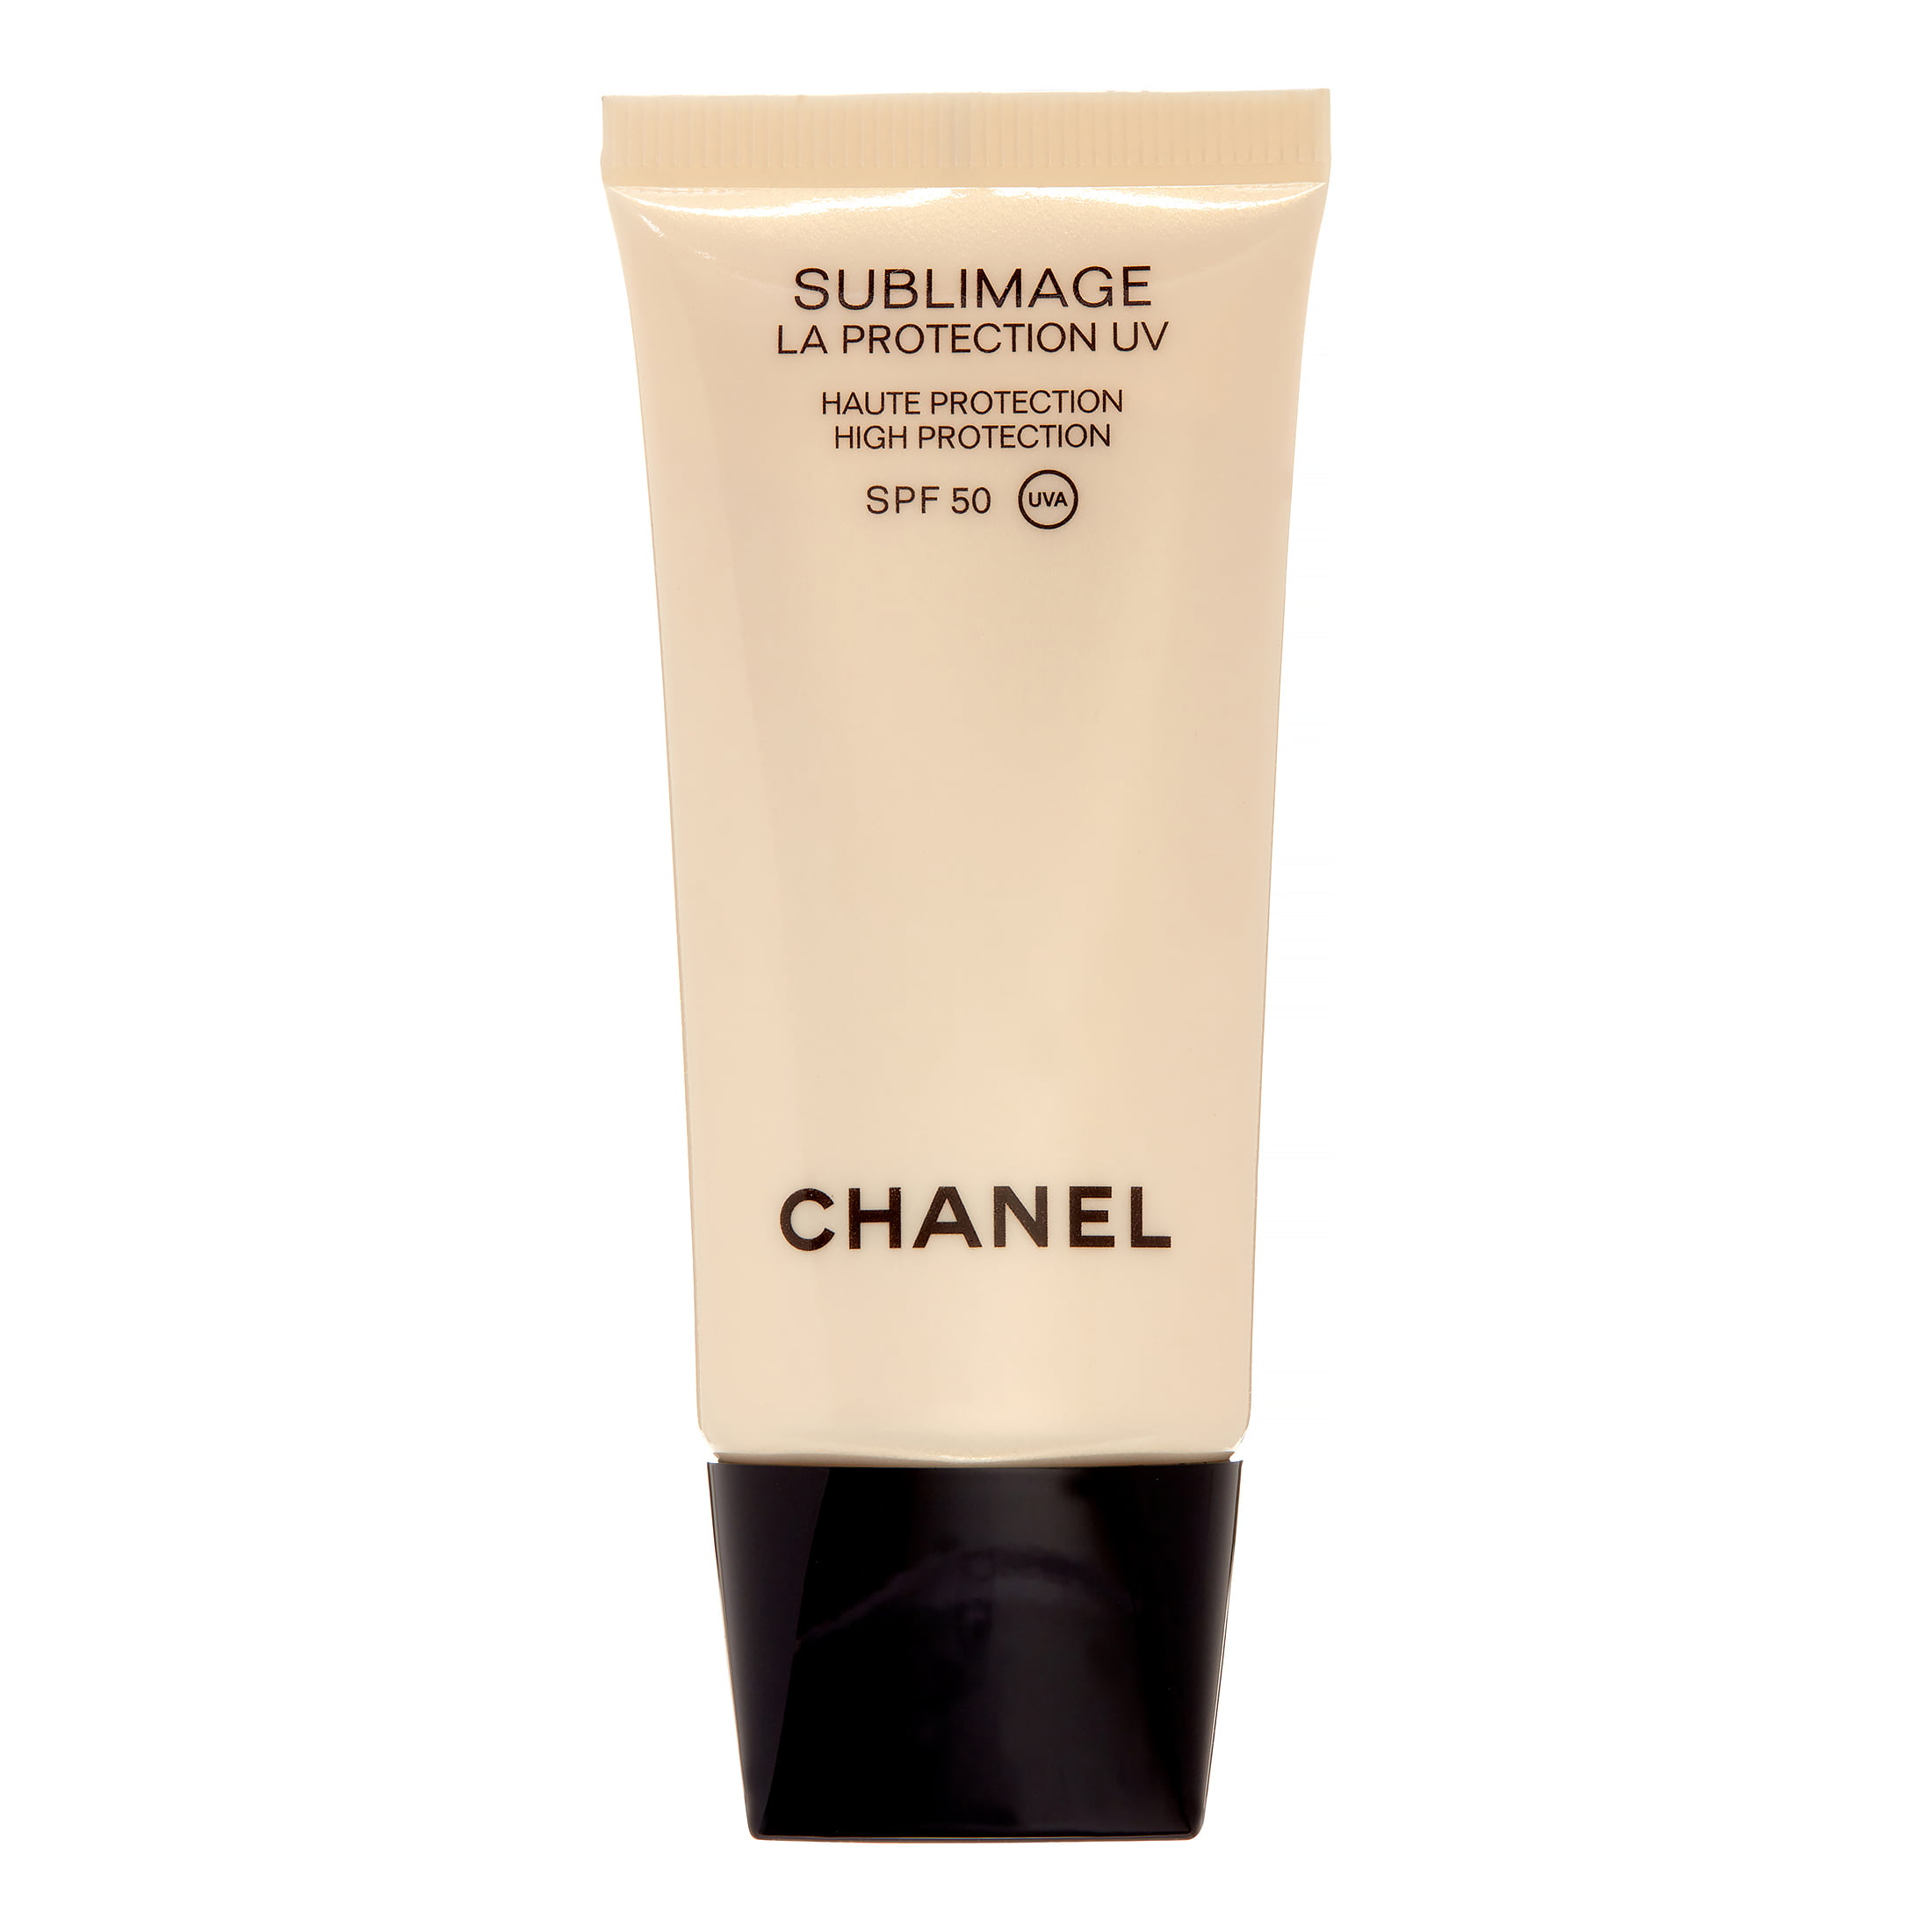 Sublimage La Protection UV Ultimate Regeneration and Complete Protection  SPF 50 Chanel 1 oz Sunscreen Unisex 